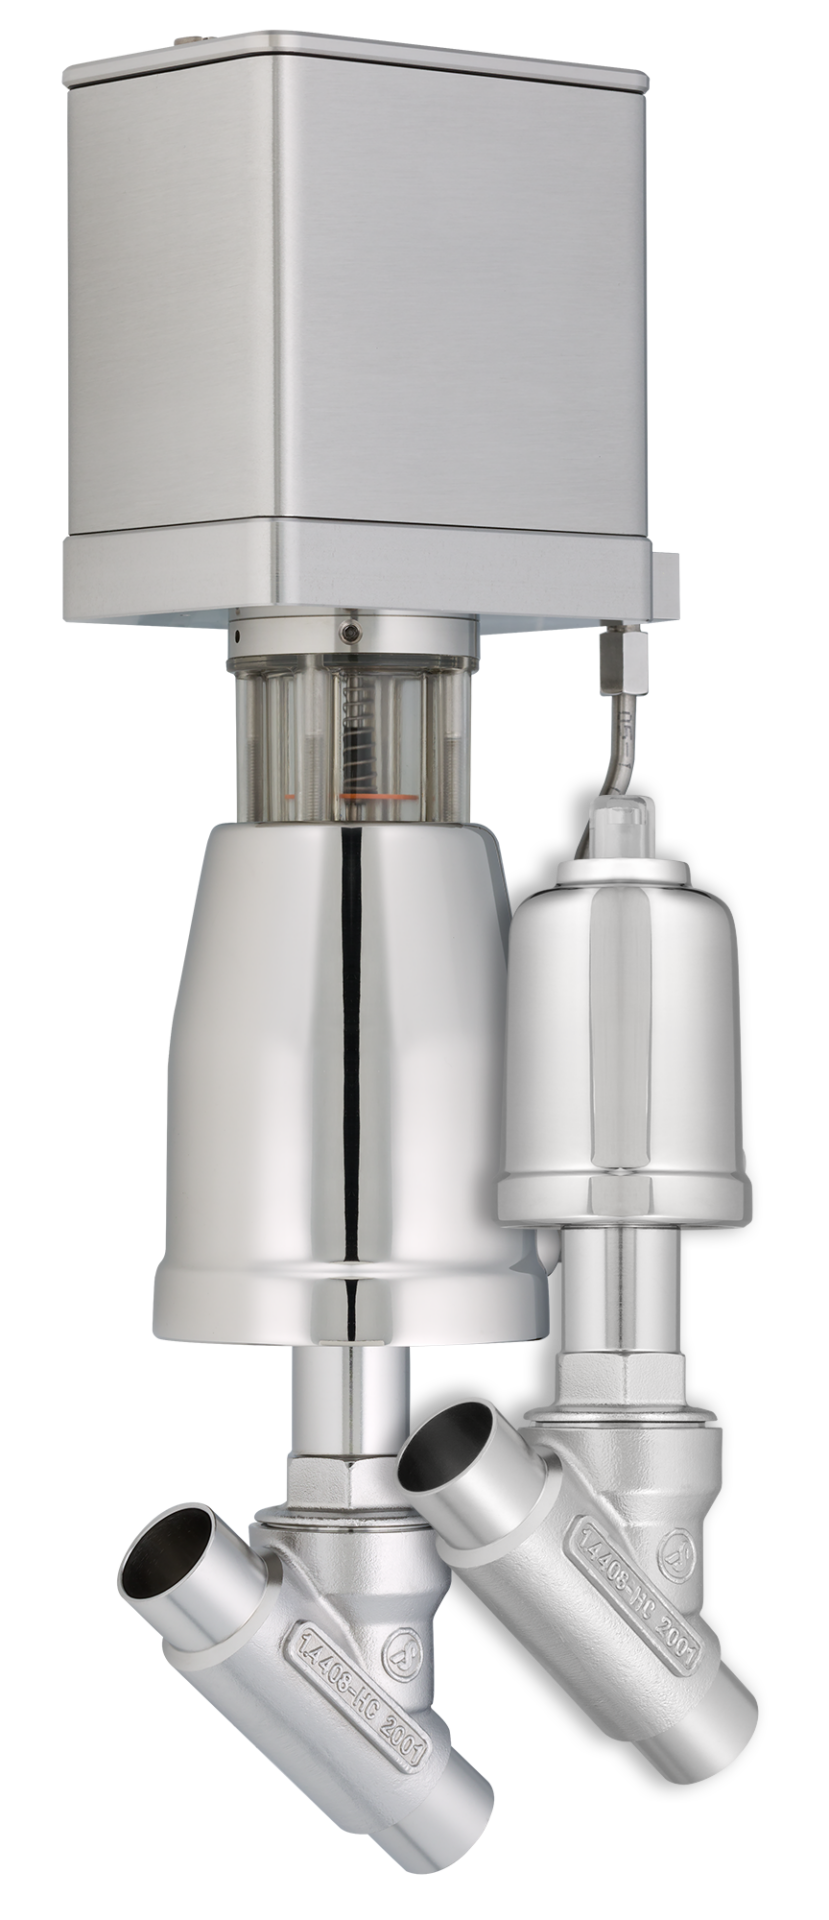 New Hygienic Angle Seat Valves For Food and Beverage Production